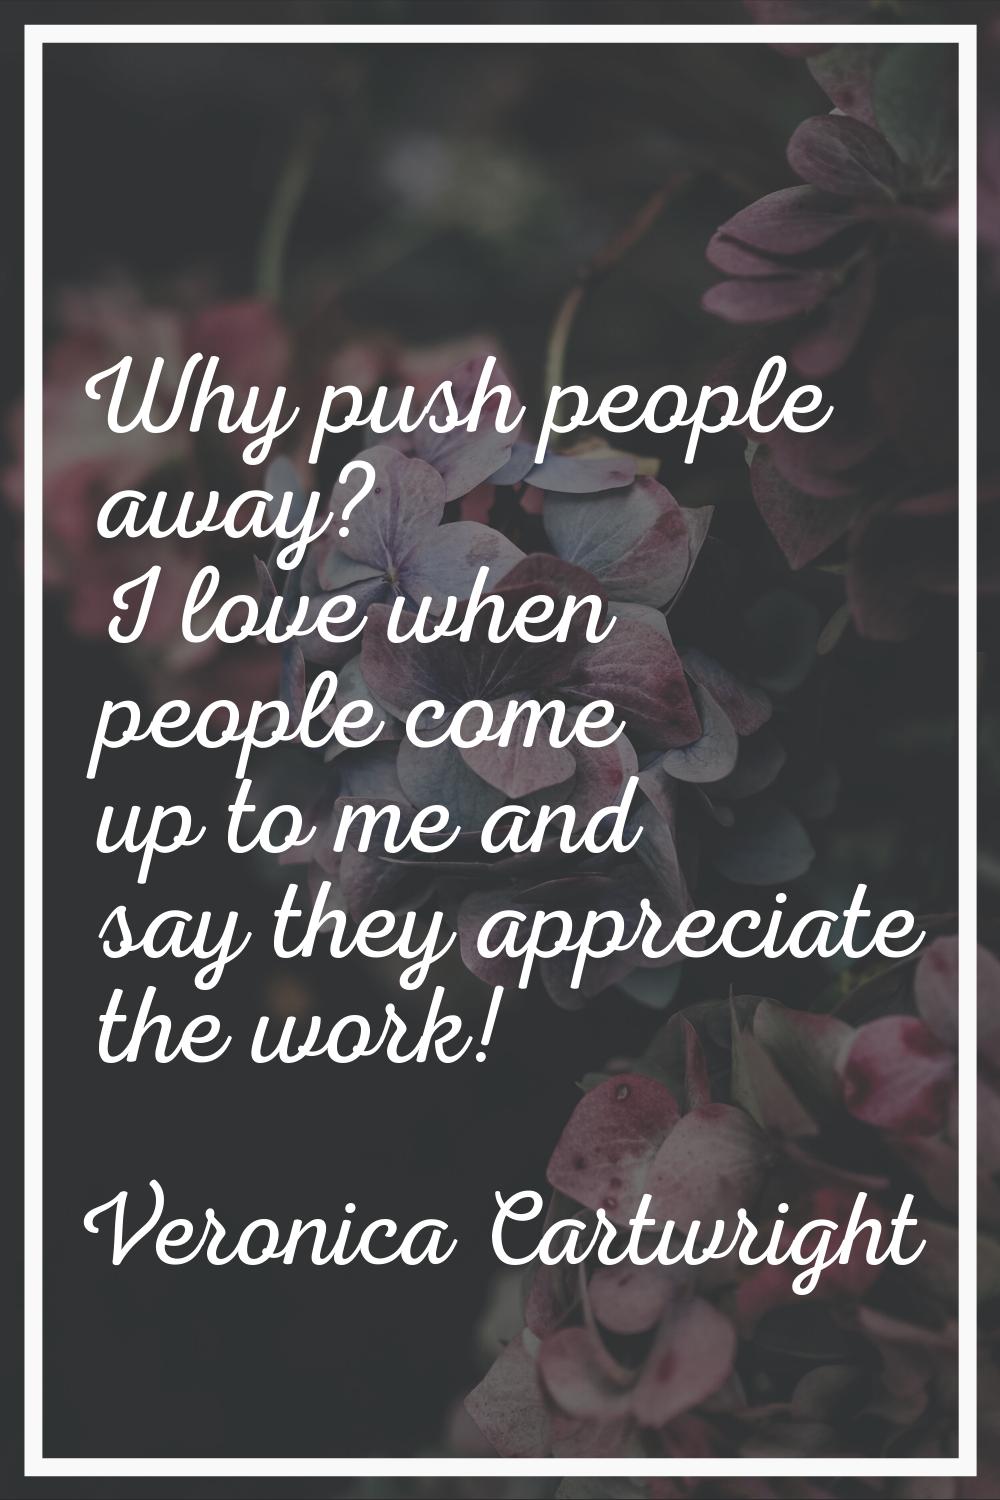 Why push people away? I love when people come up to me and say they appreciate the work!